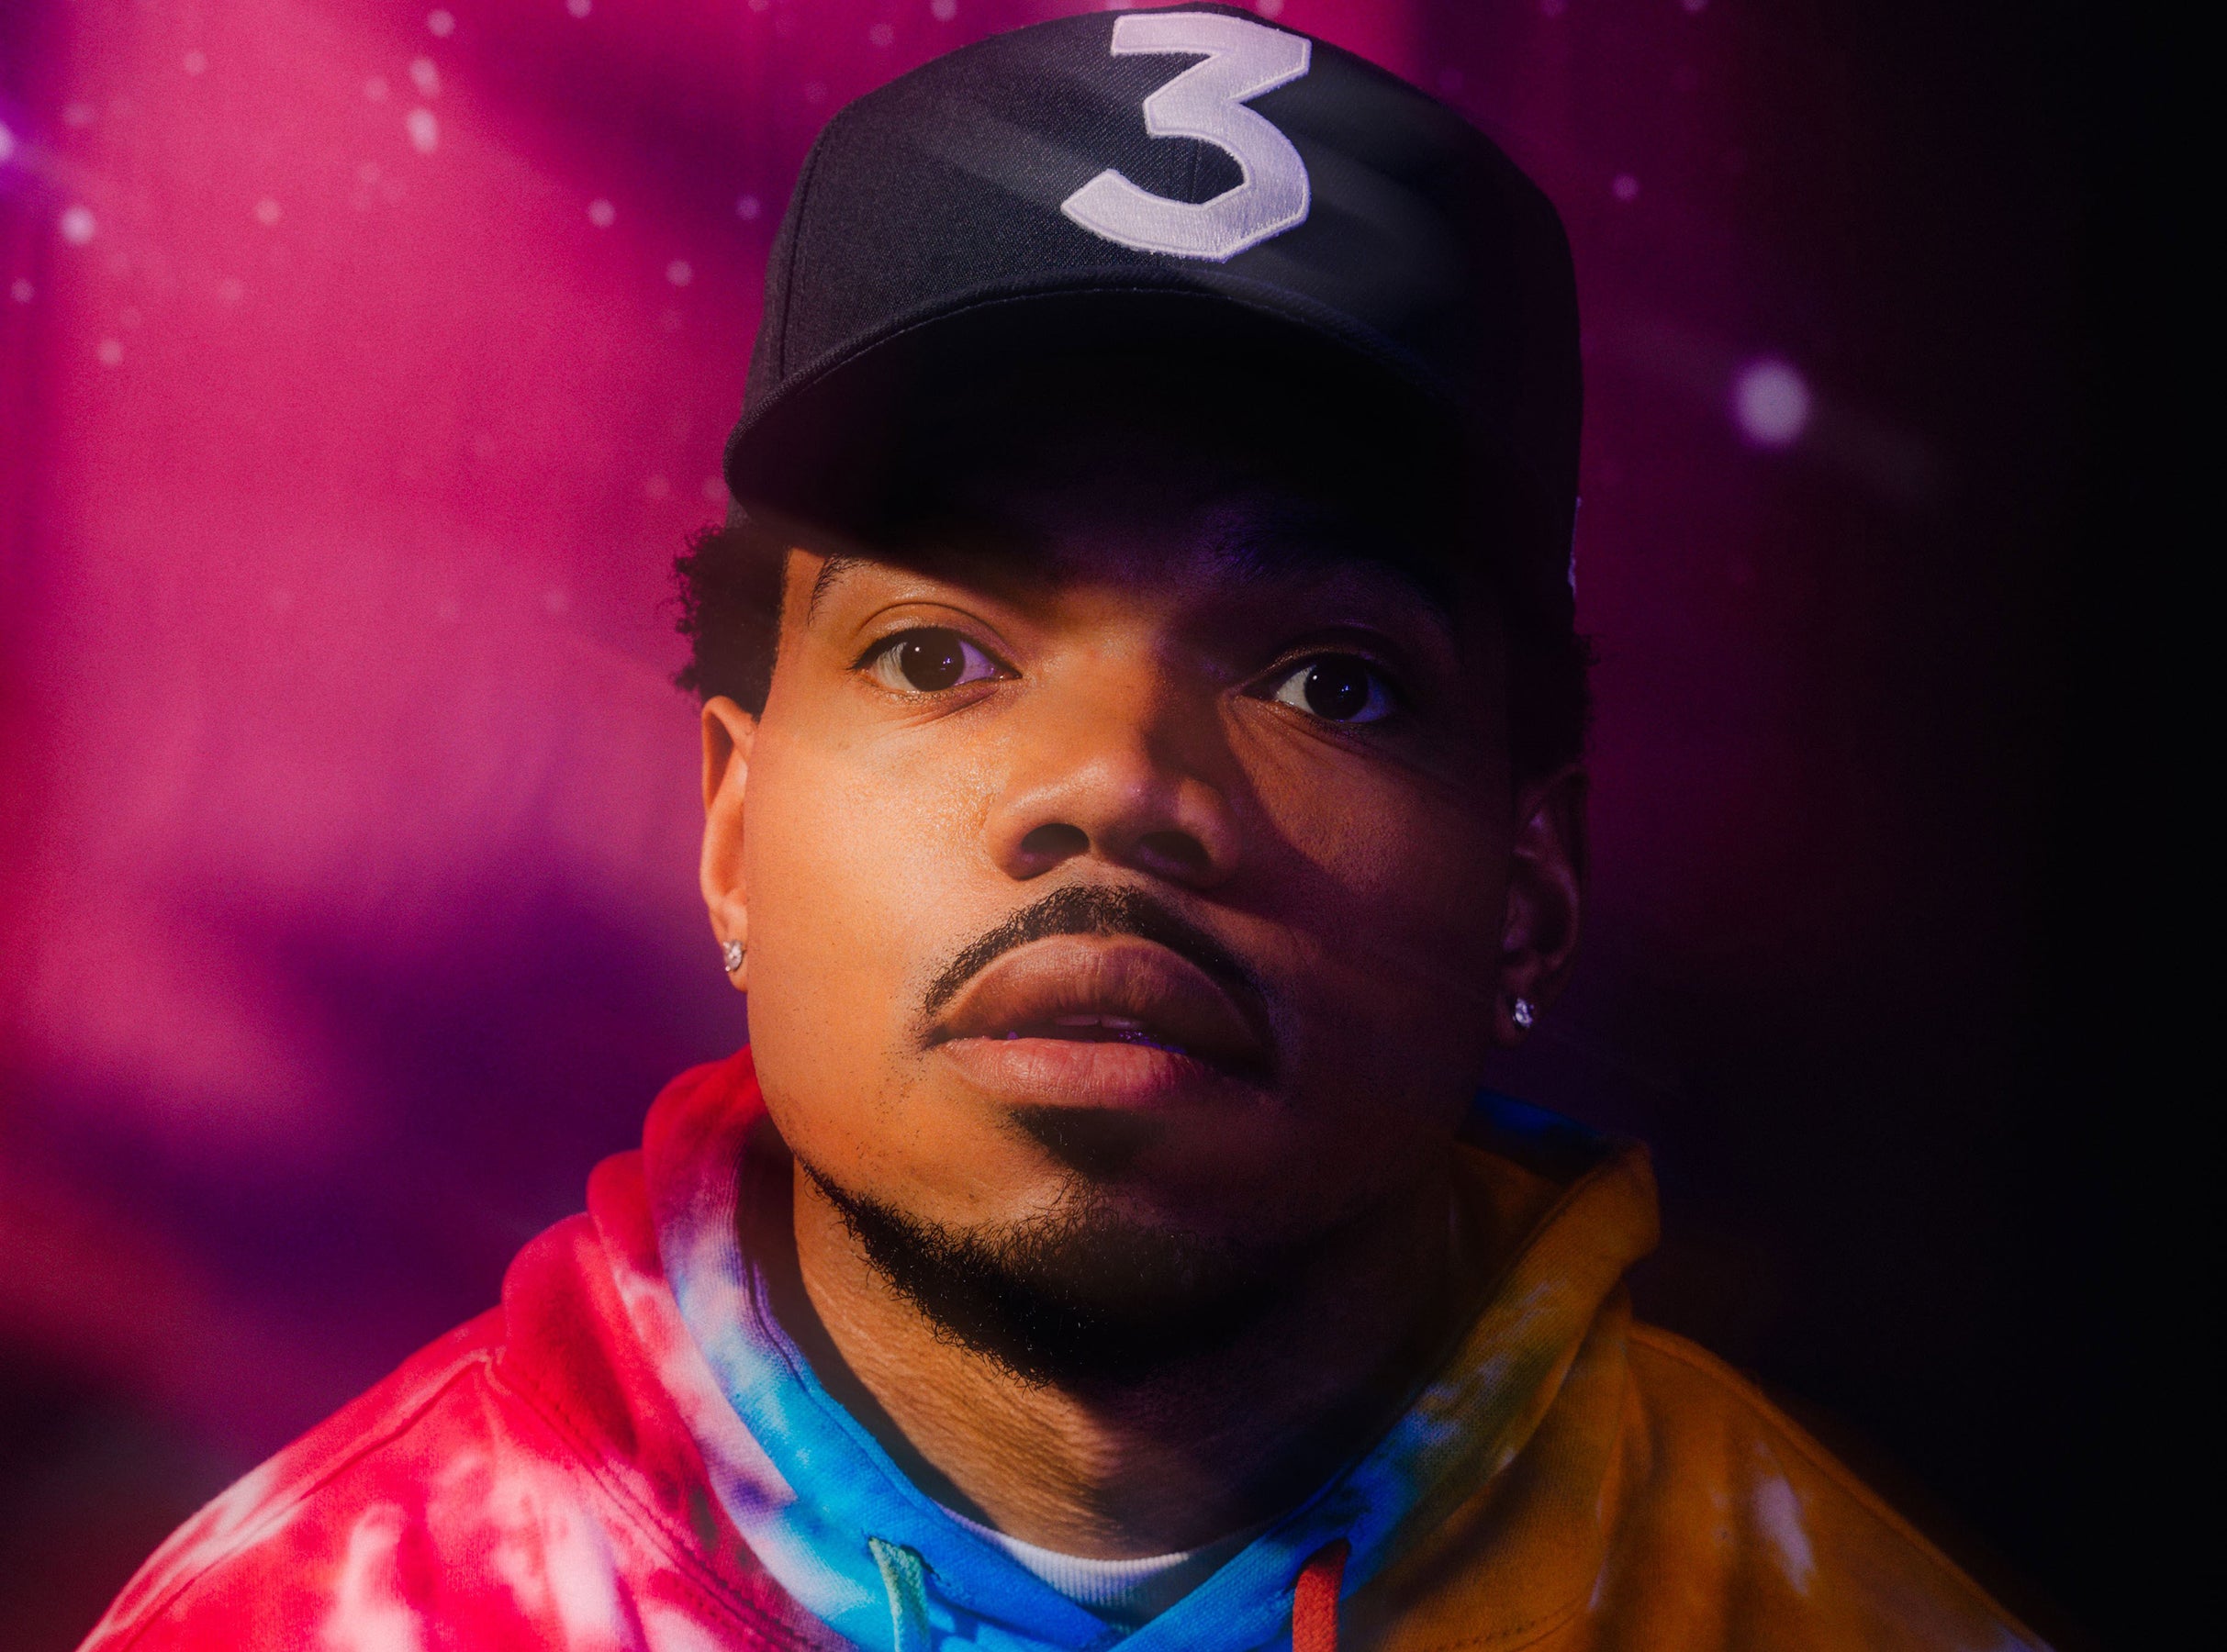 Chance The Rapper at Minnesota State Fair